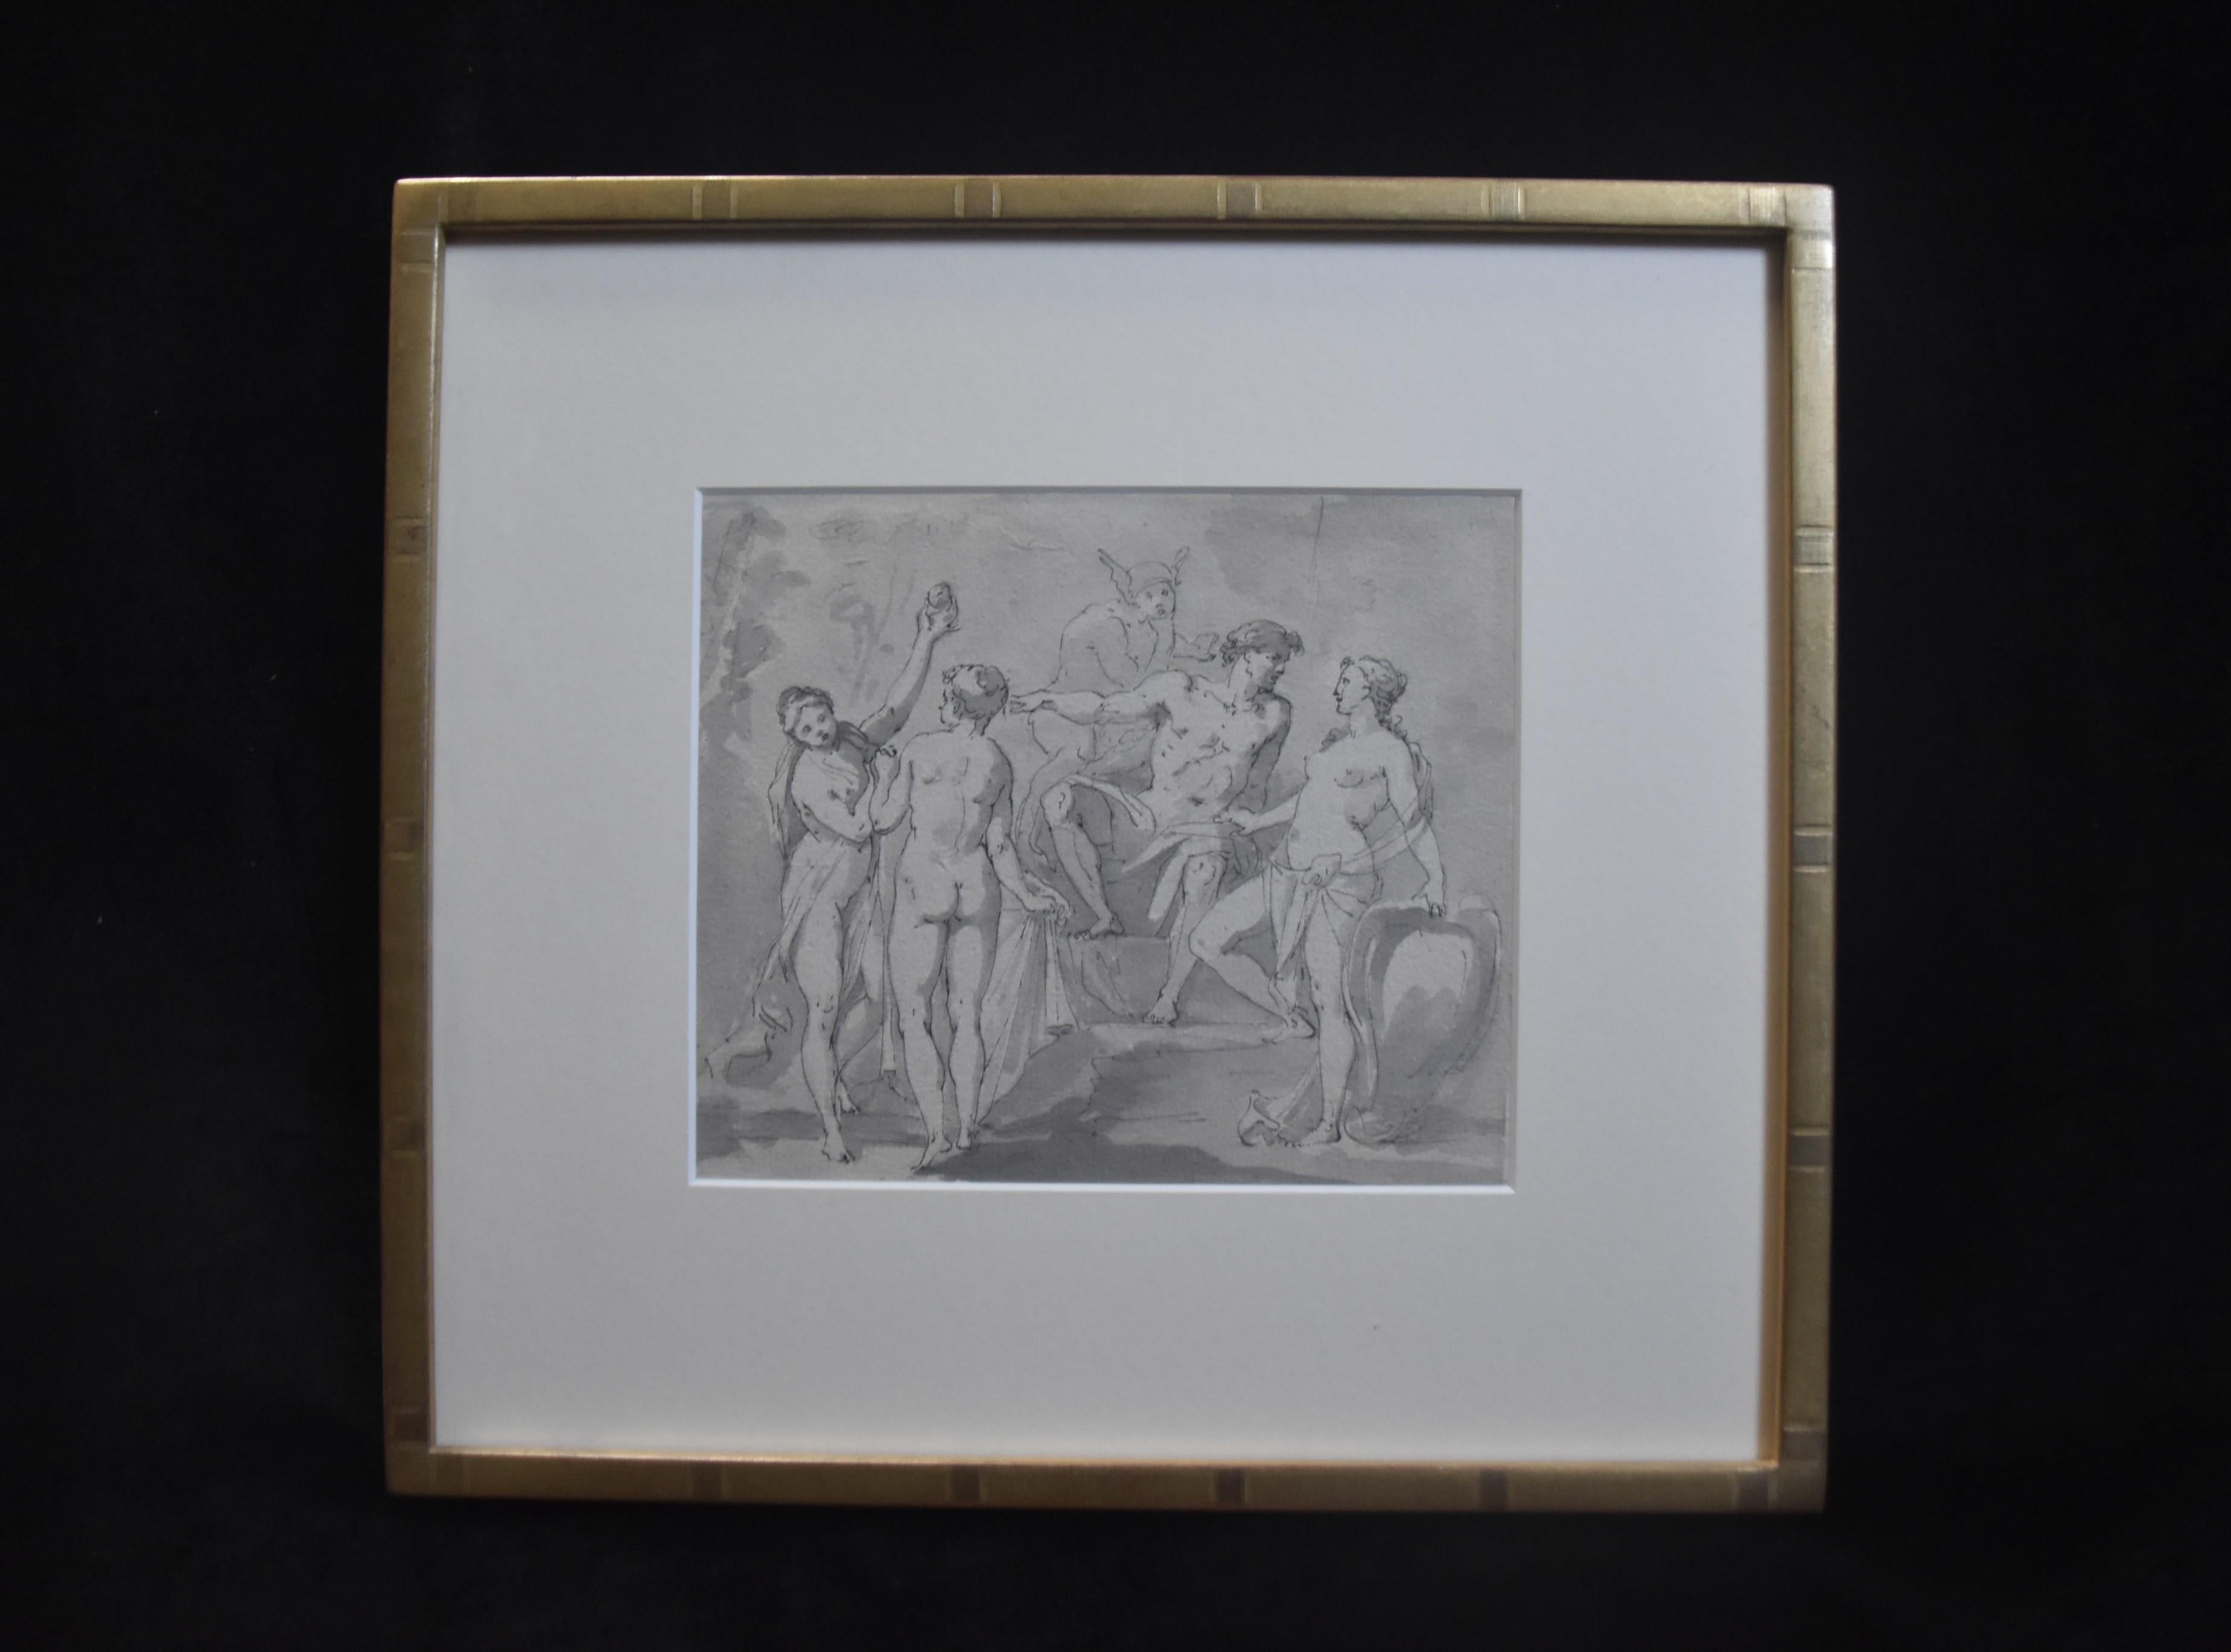 French School 18th century, The Judgement of Paris, original drawing - Old Masters Art by Unknown